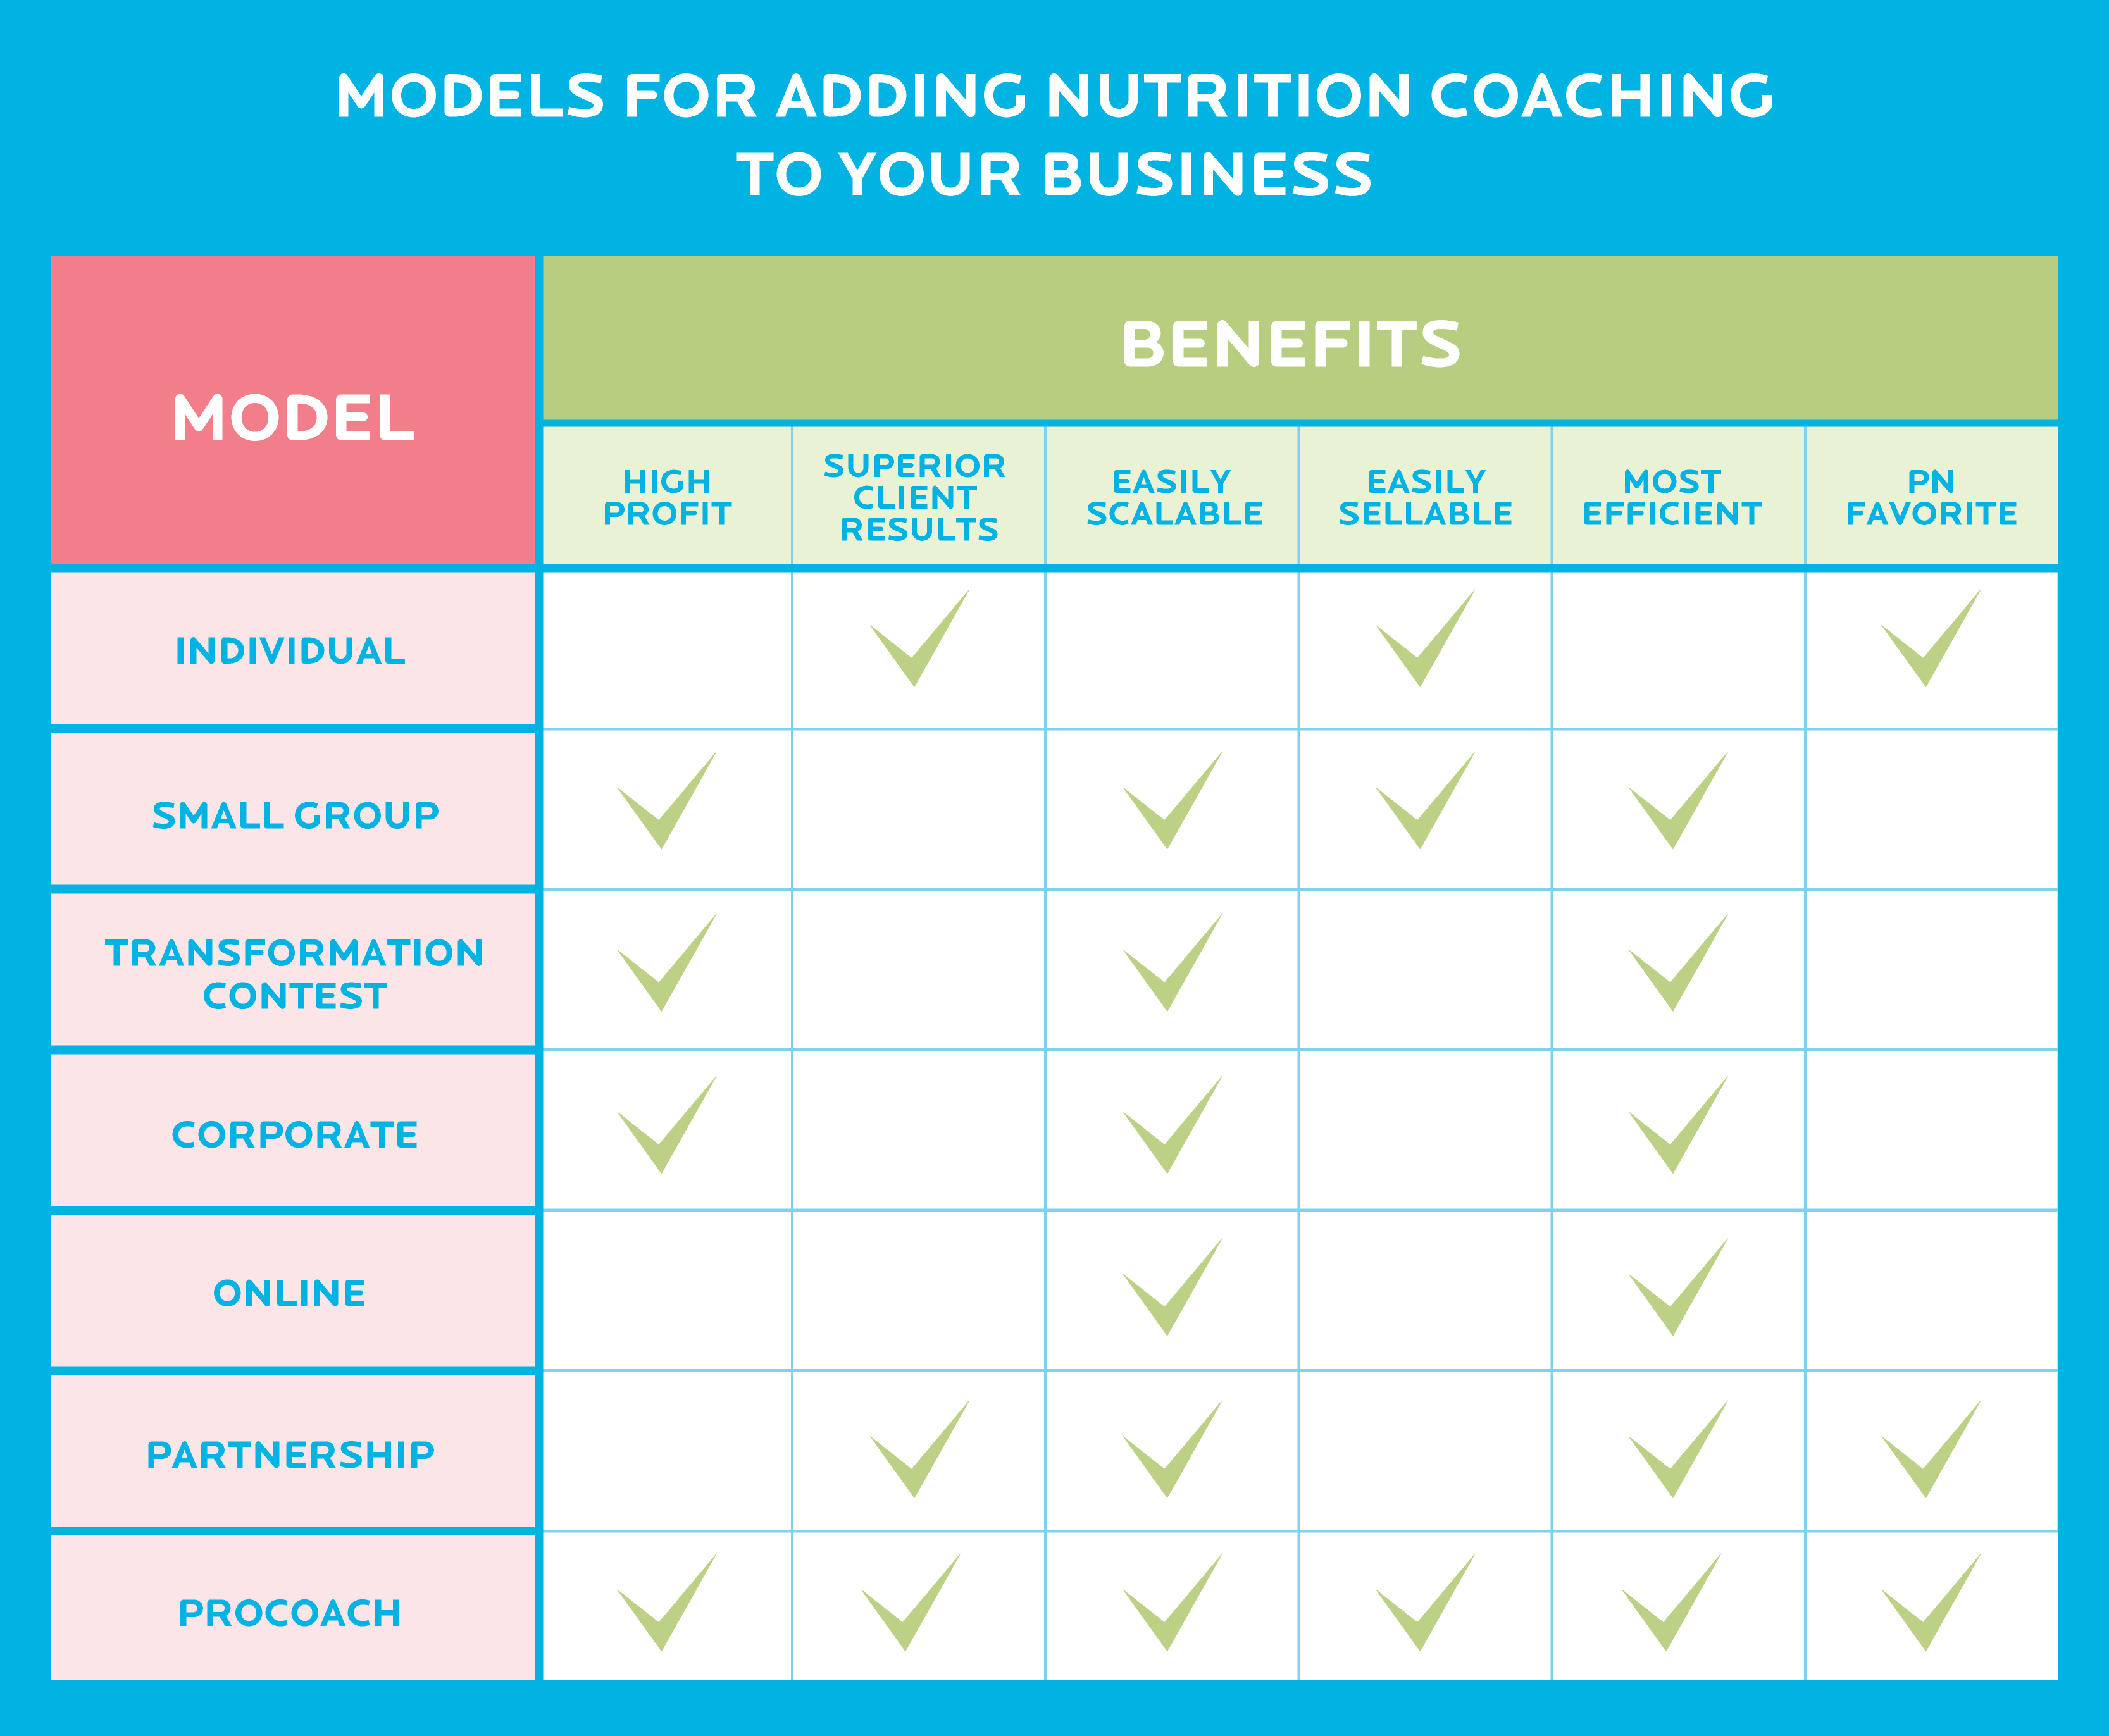 Different models for adding nutrition coaching to your business